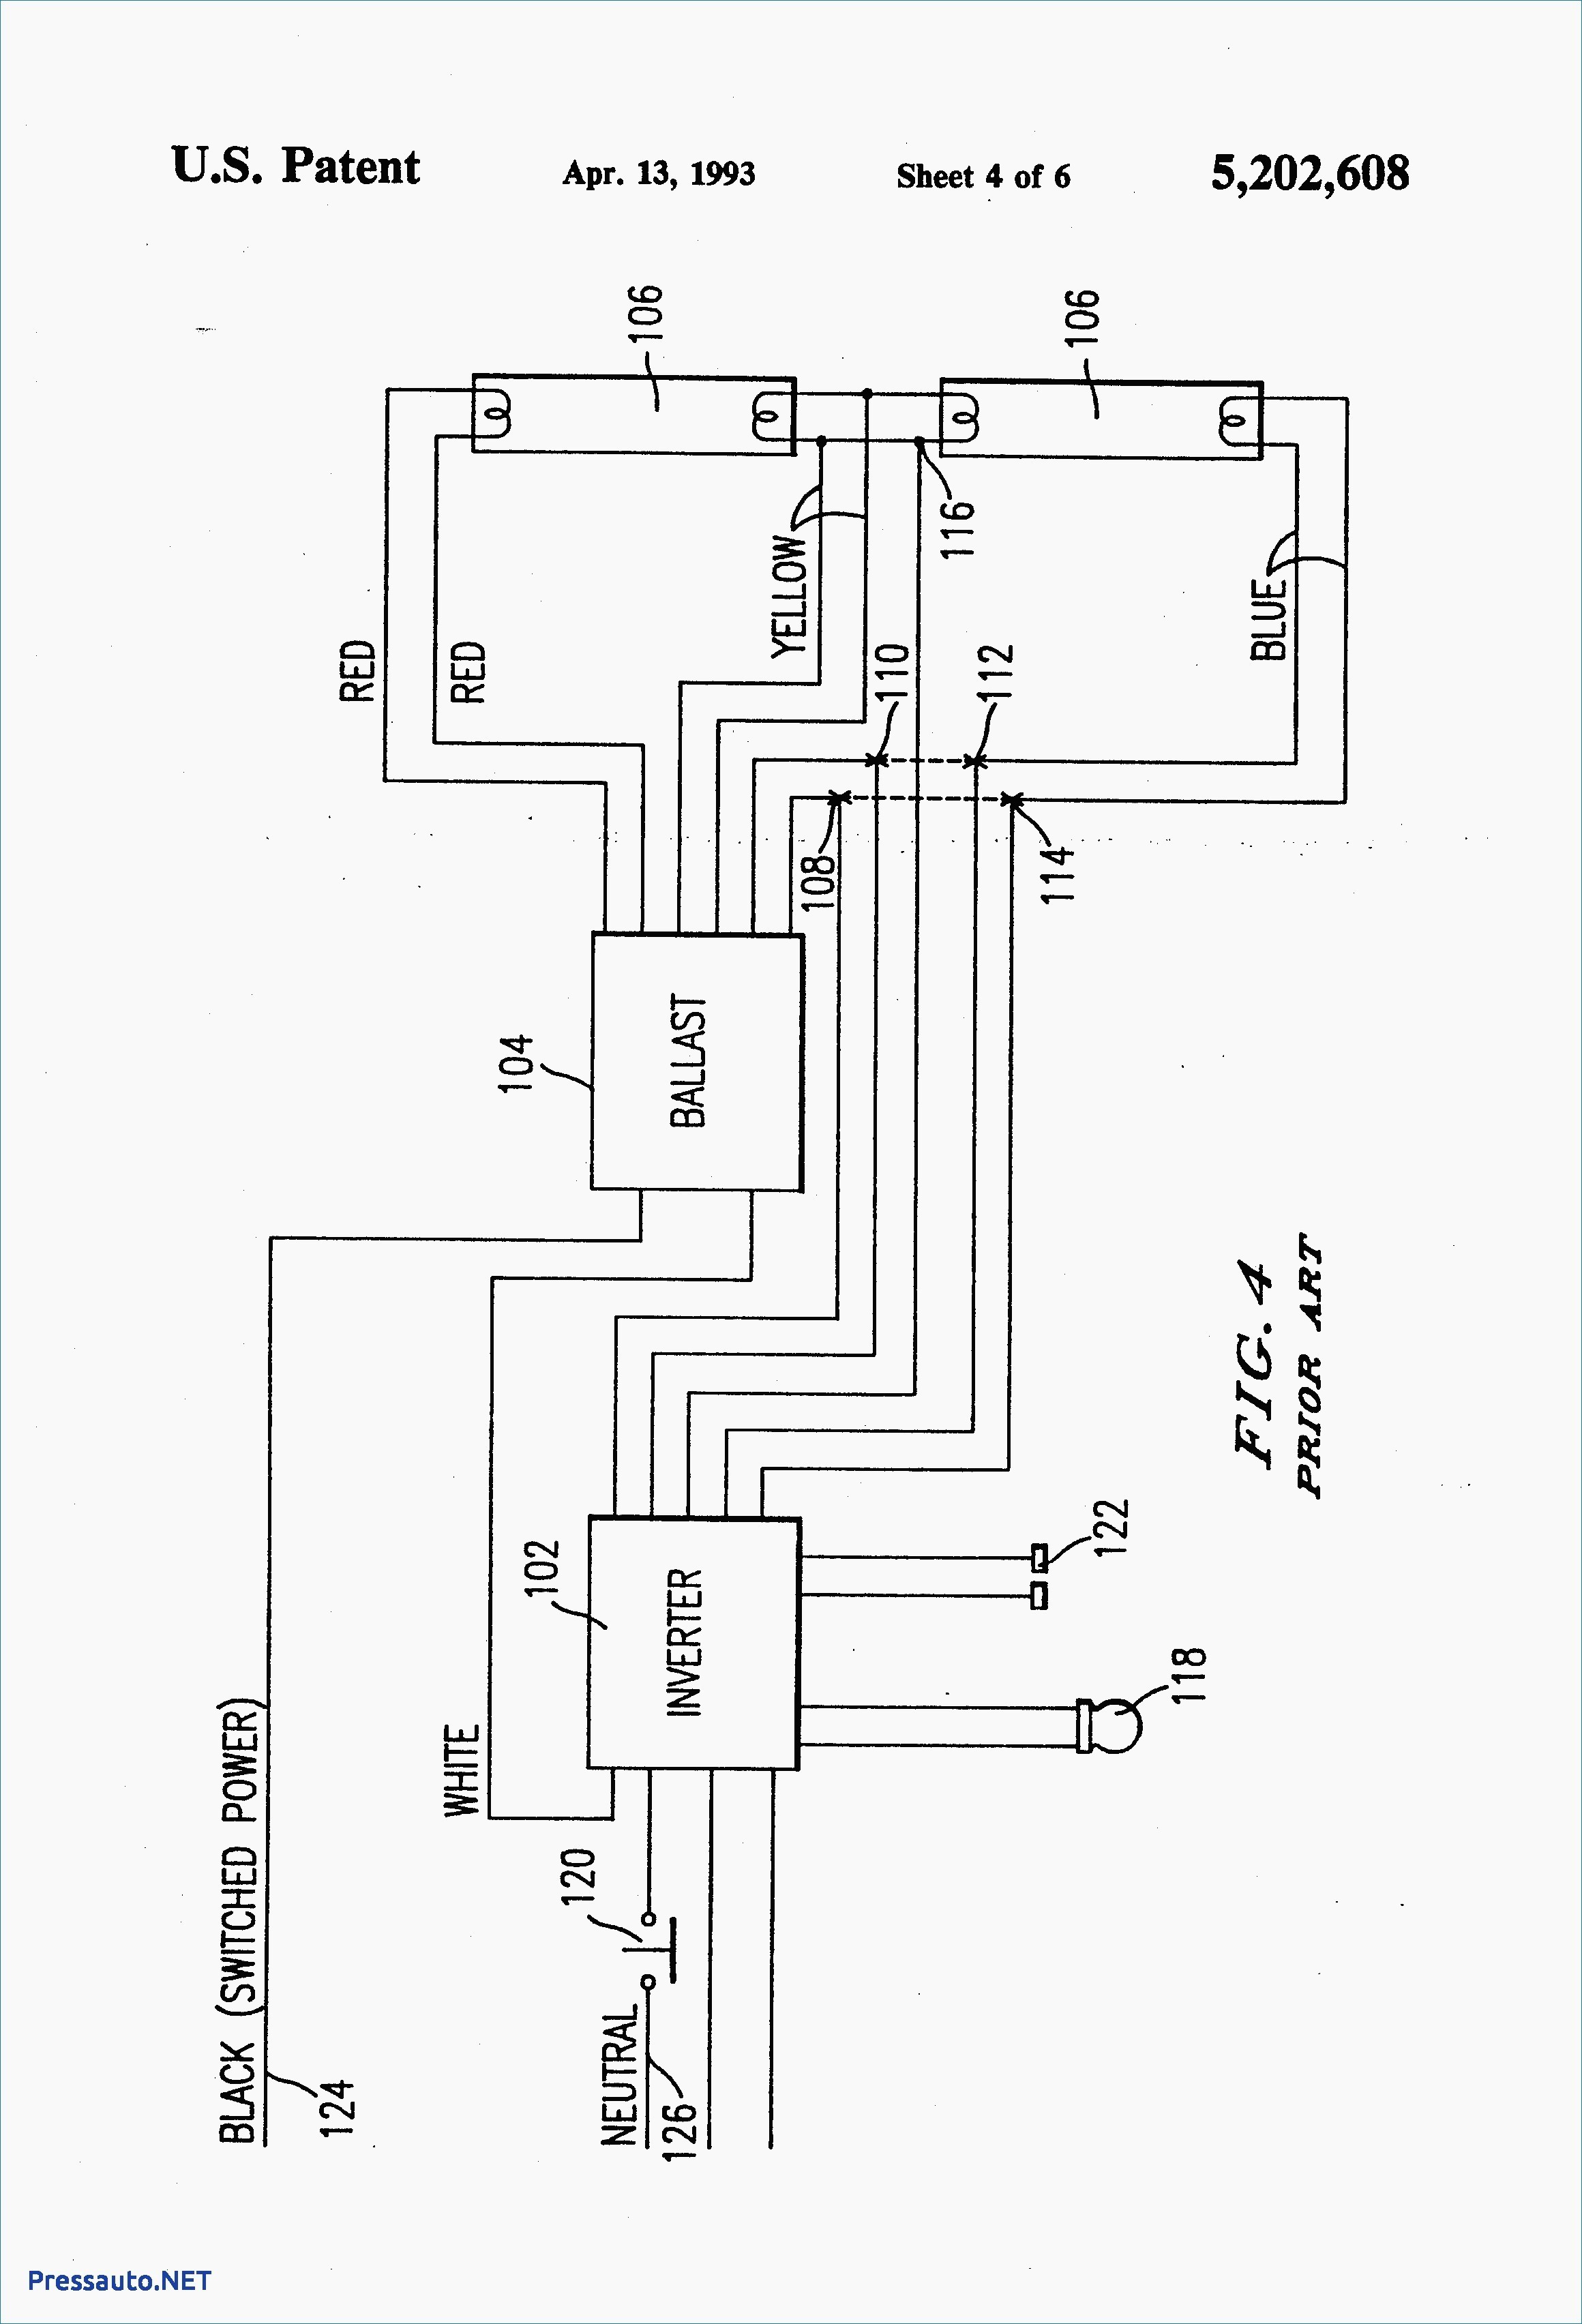 Wiring Diagram For Square D Lighting Contactors Inspirationa Square D 8903 Lighting Contactor Wiring Diagram Square D Lighting Contactor Wiring Diagram